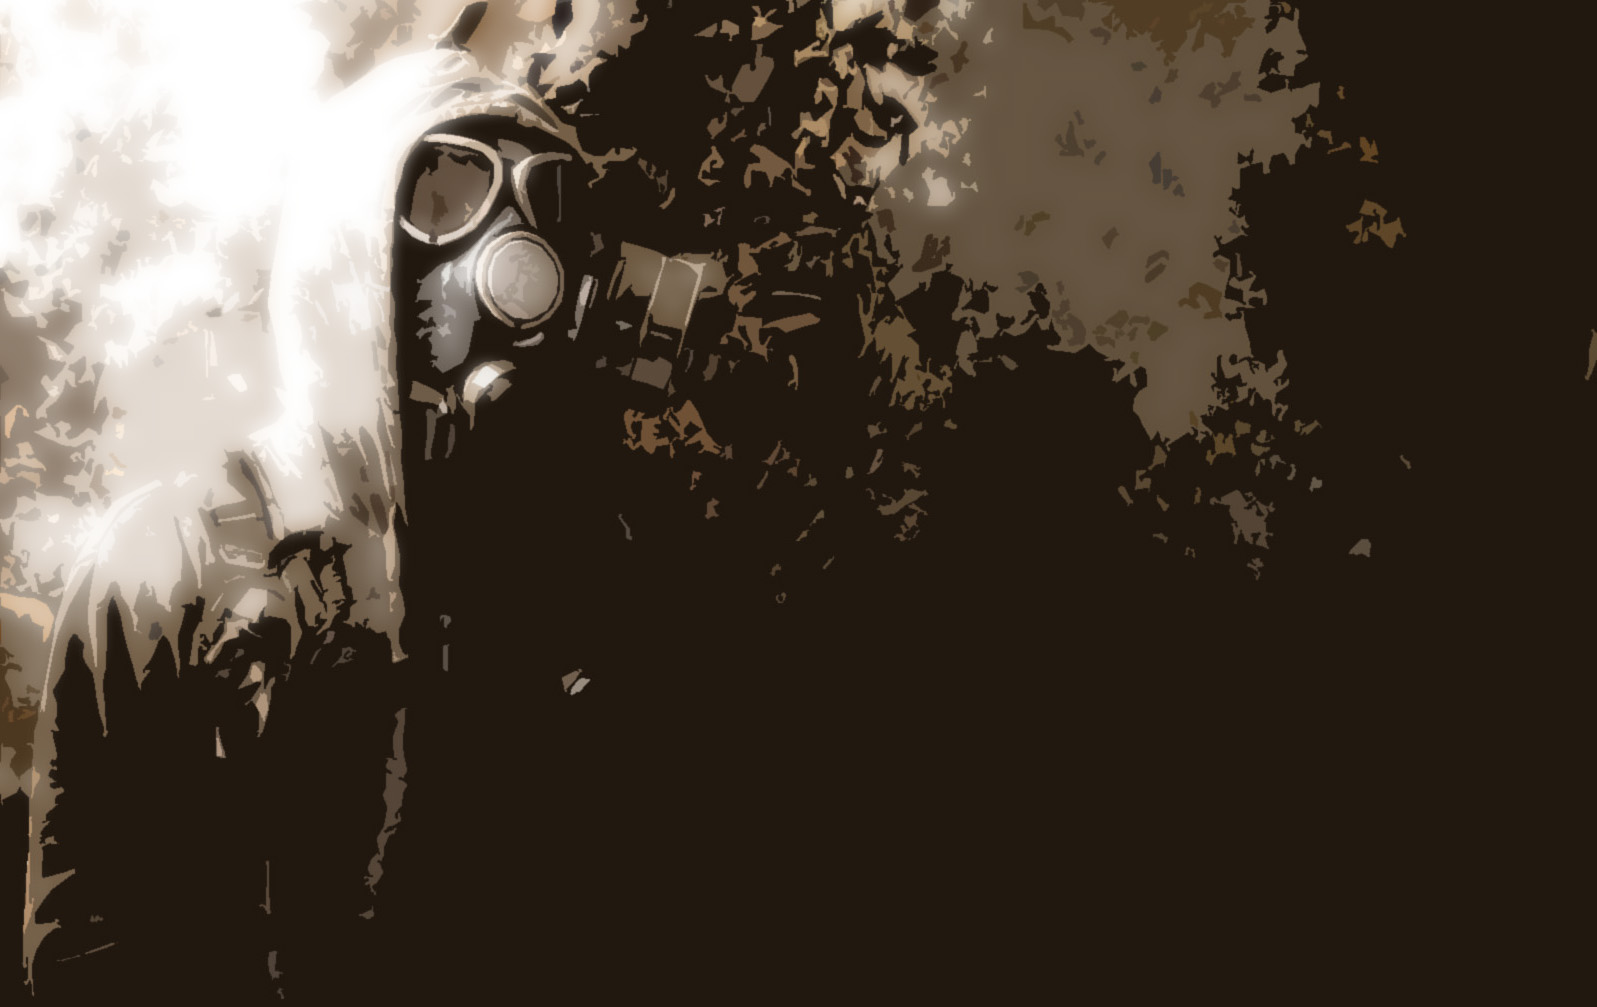 Military Gas Mask HD Wallpaper | Background Image